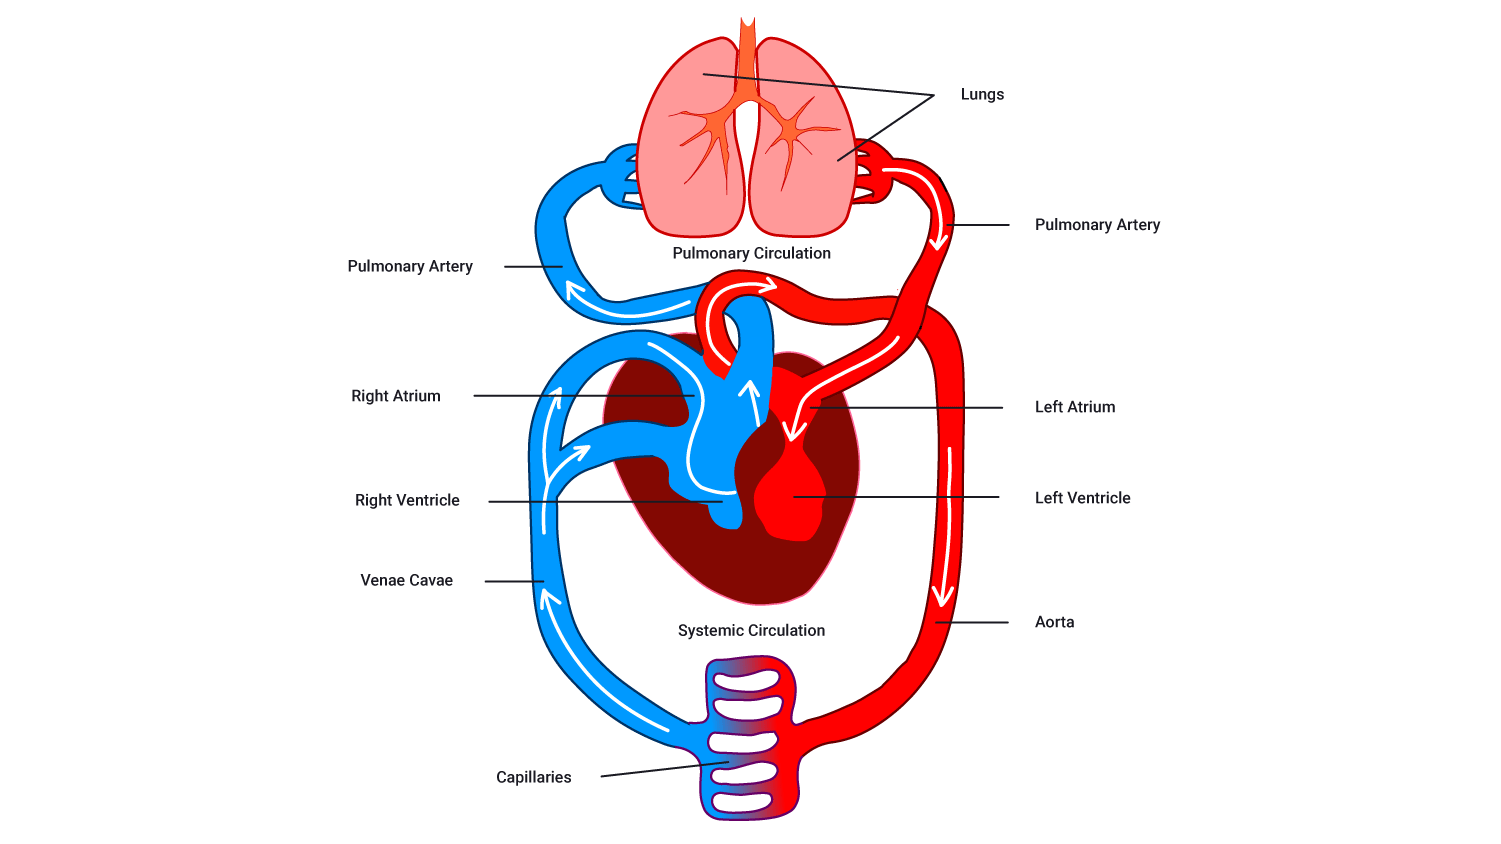 Image showing pulmonary and systemic circuit